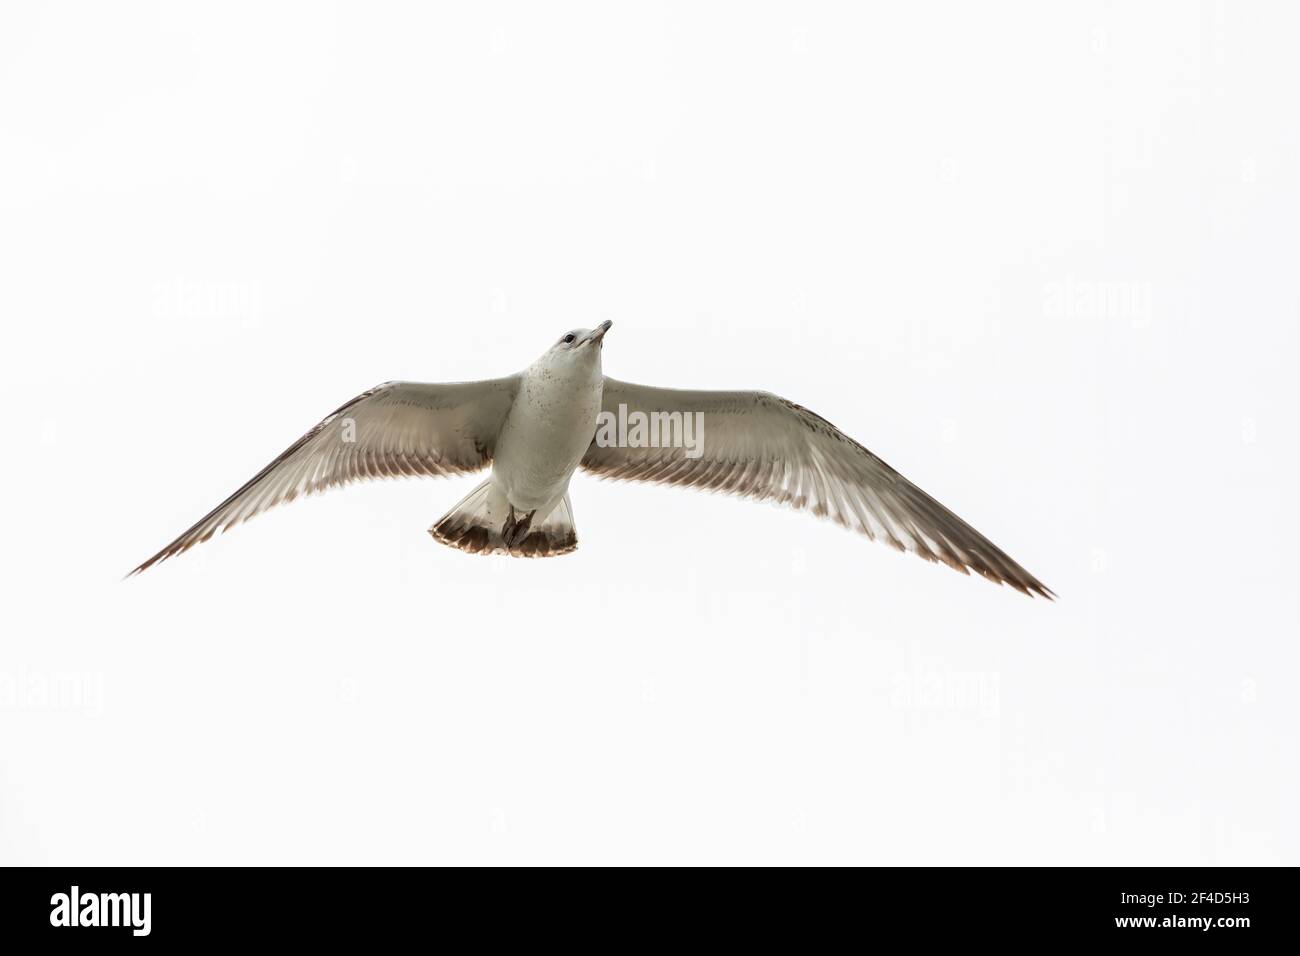 A ring-billed gull in flight. Stock Photo